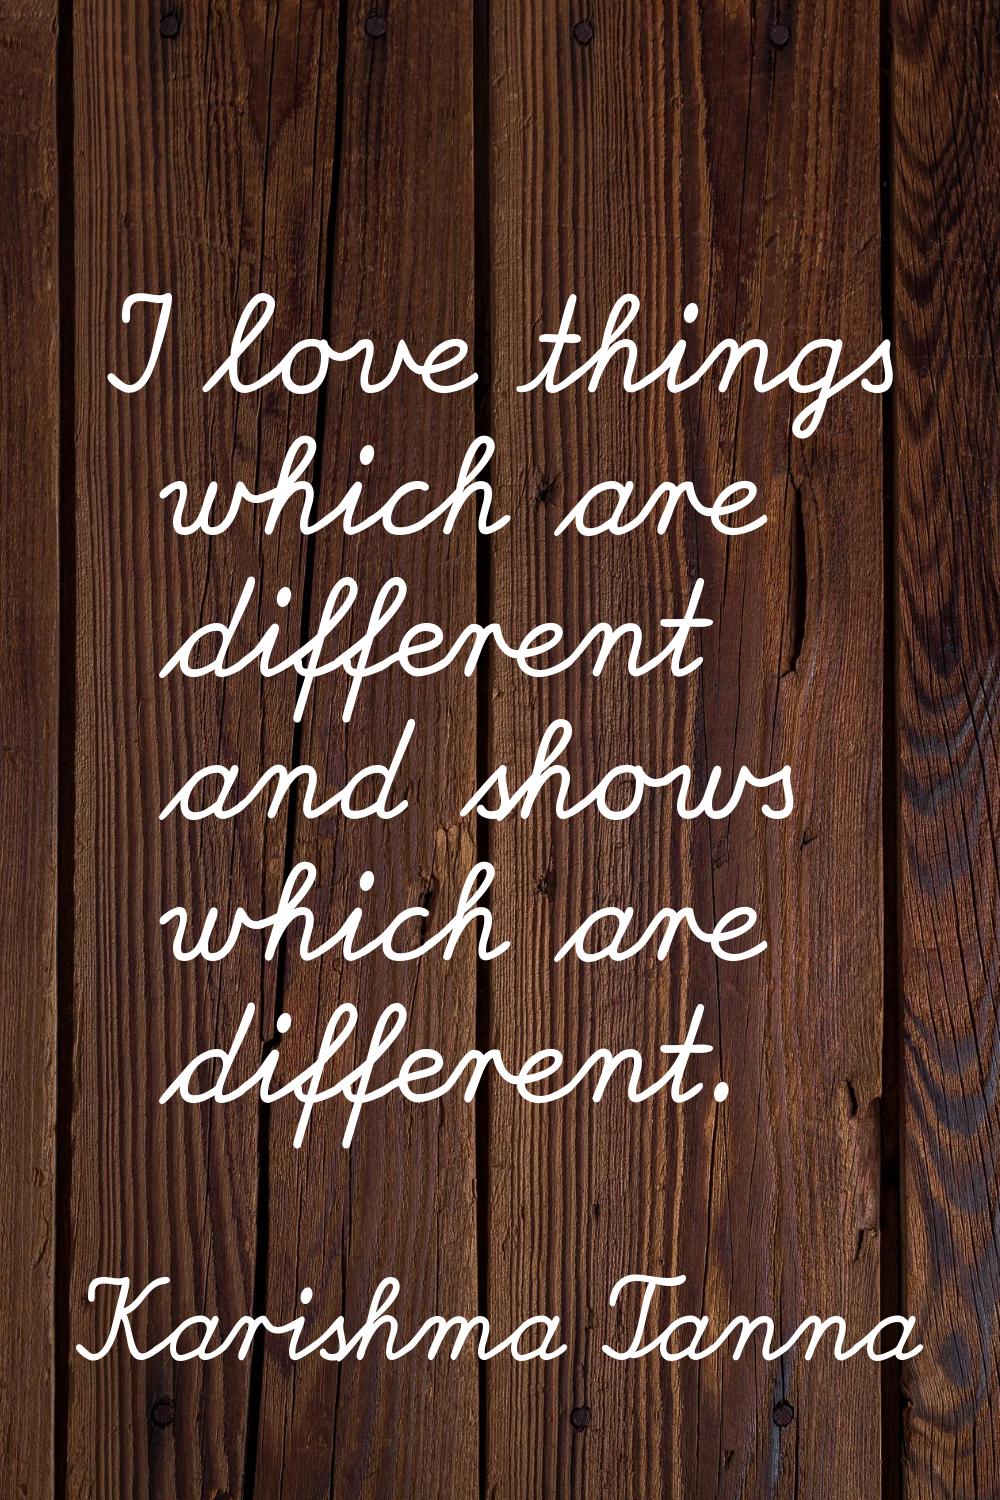 I love things which are different and shows which are different.